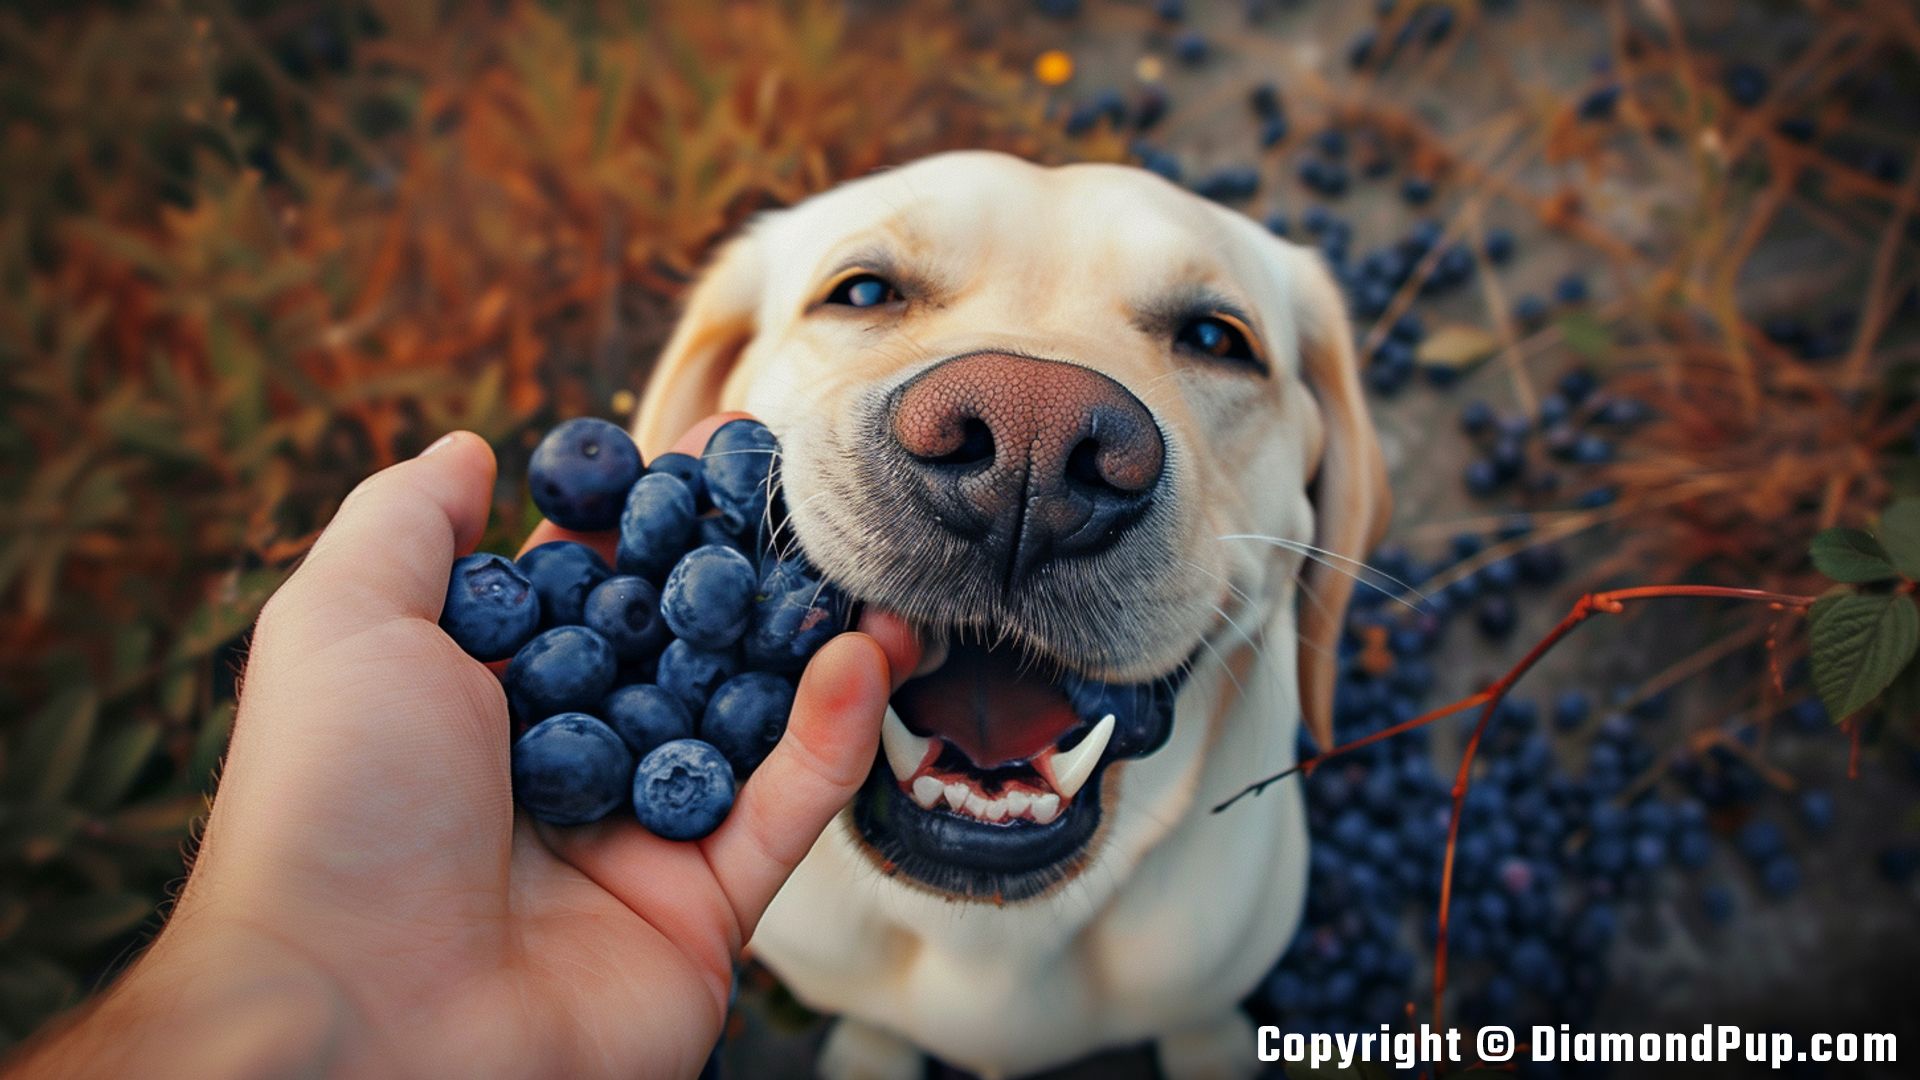 Photograph of a Playful Labrador Snacking on Blueberries